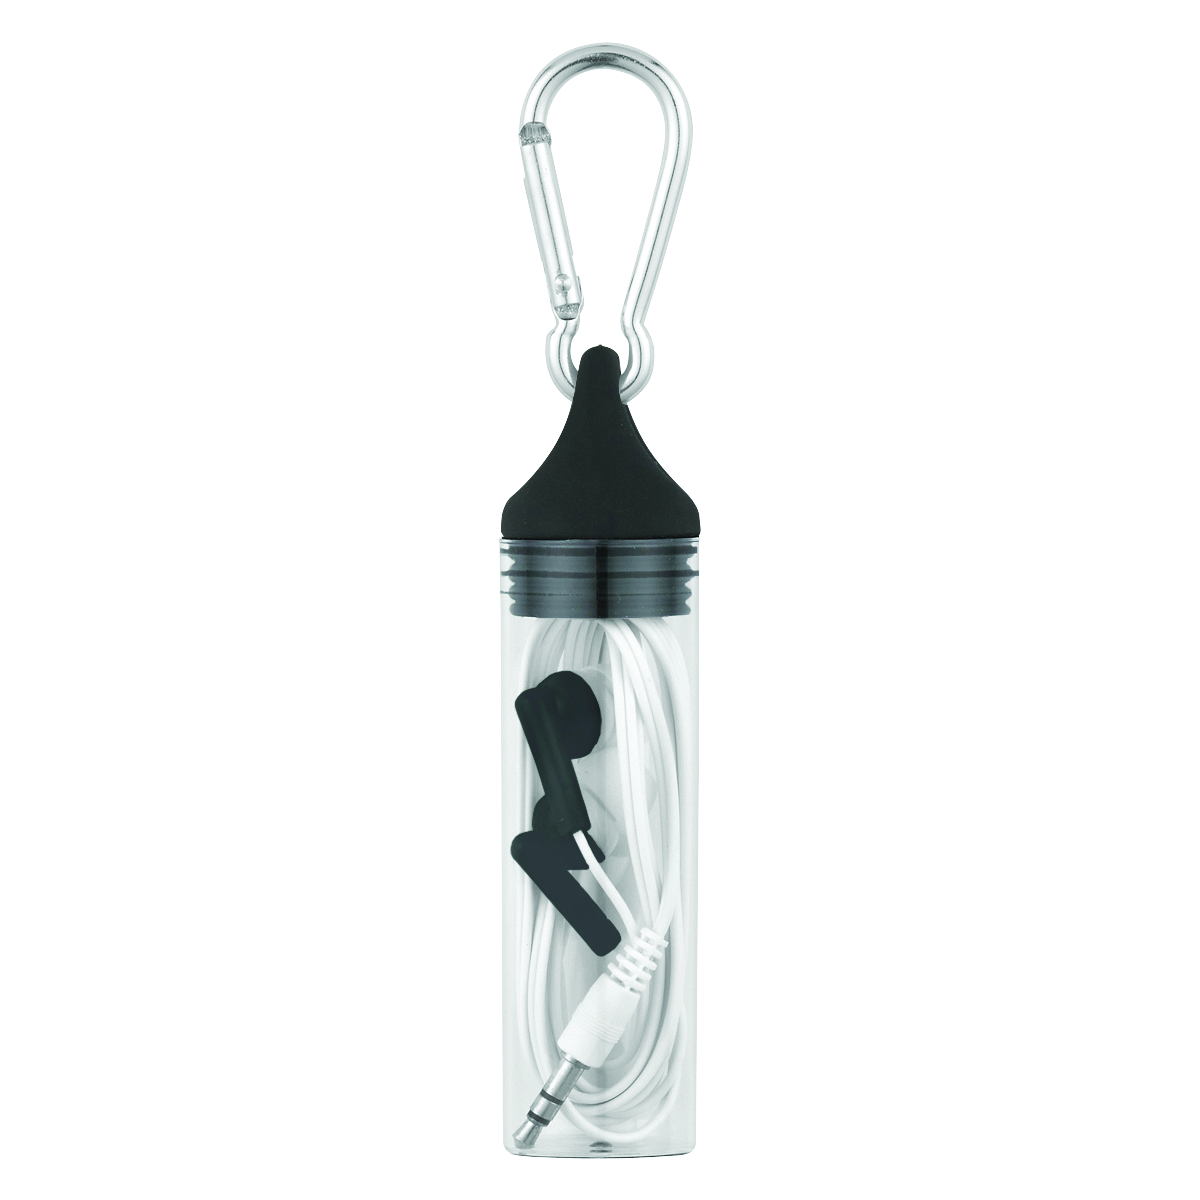 Black Earbuds in Case with Carabiner